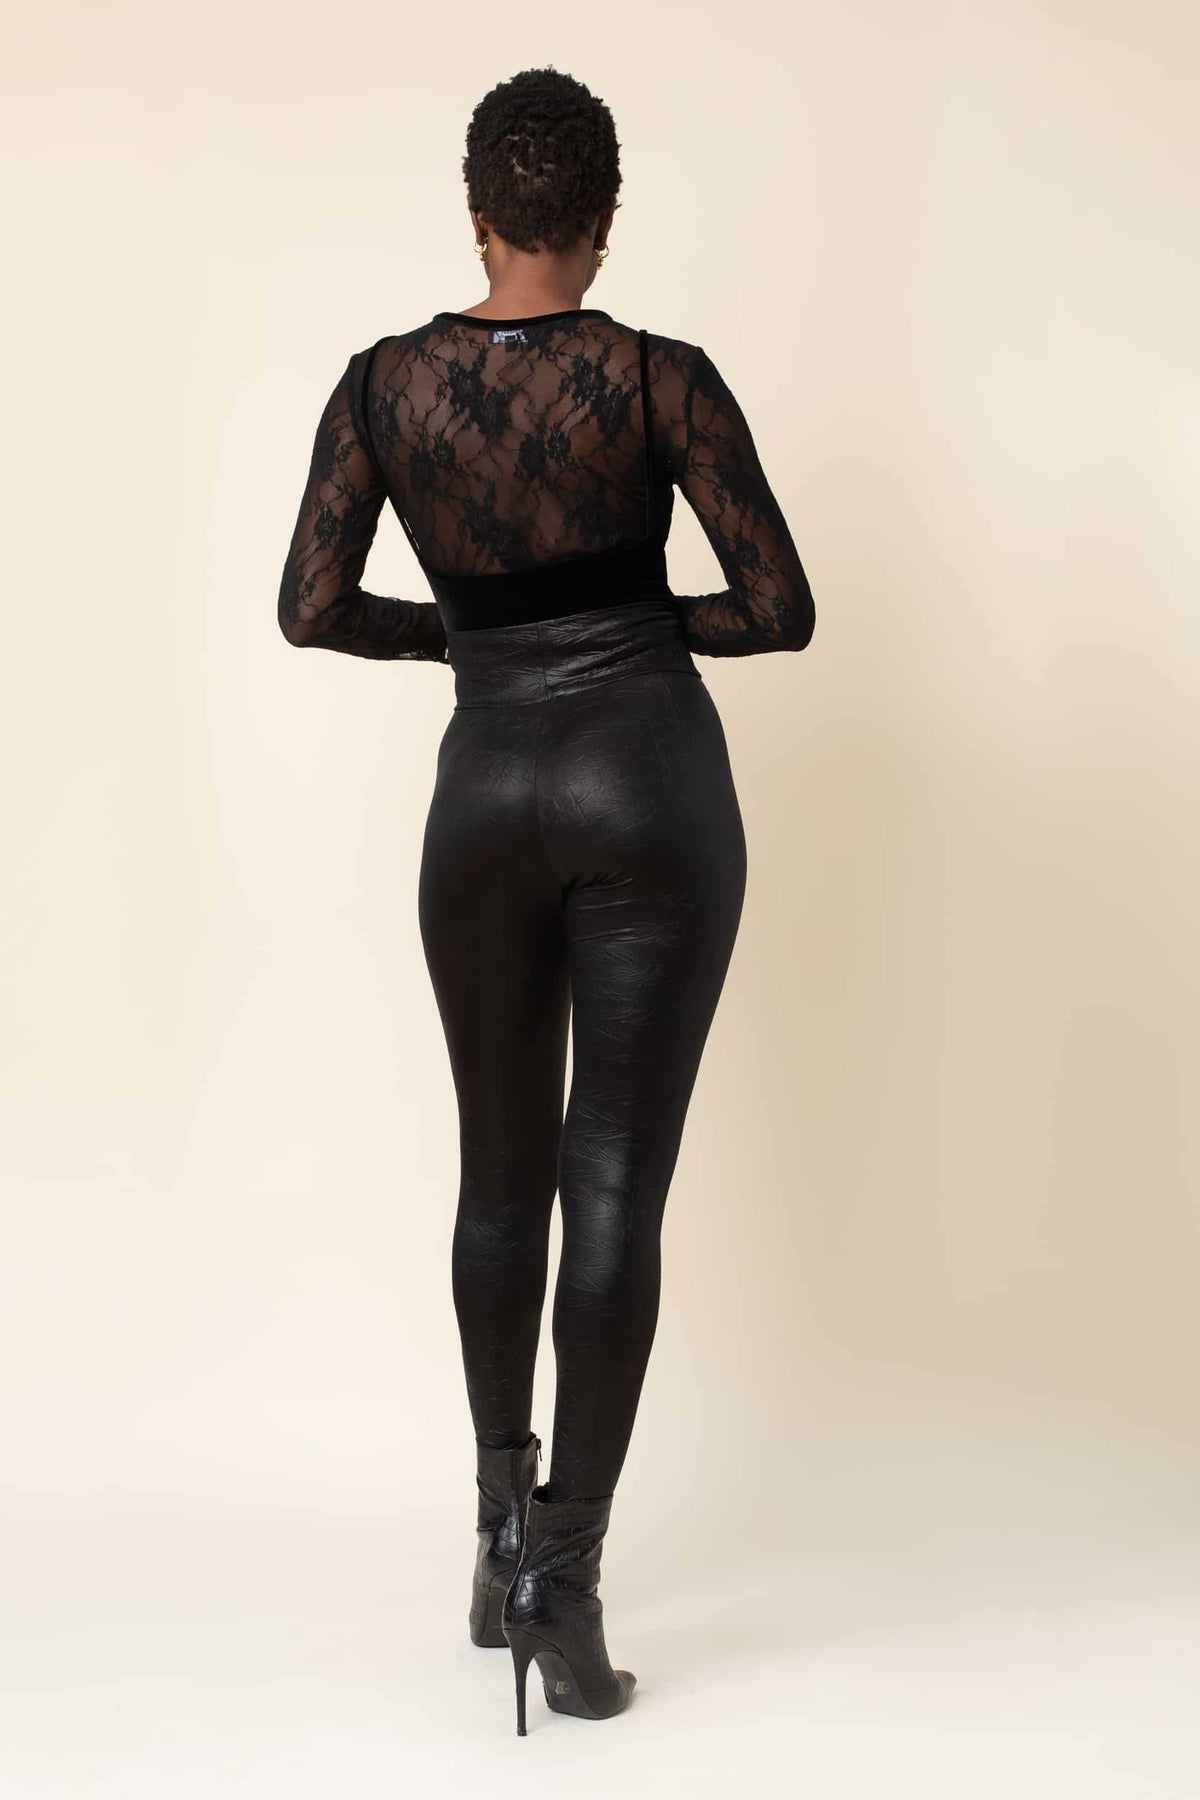 West Loop High Waist Leggings Black Size L - $13 New With Tags - From  Sellani